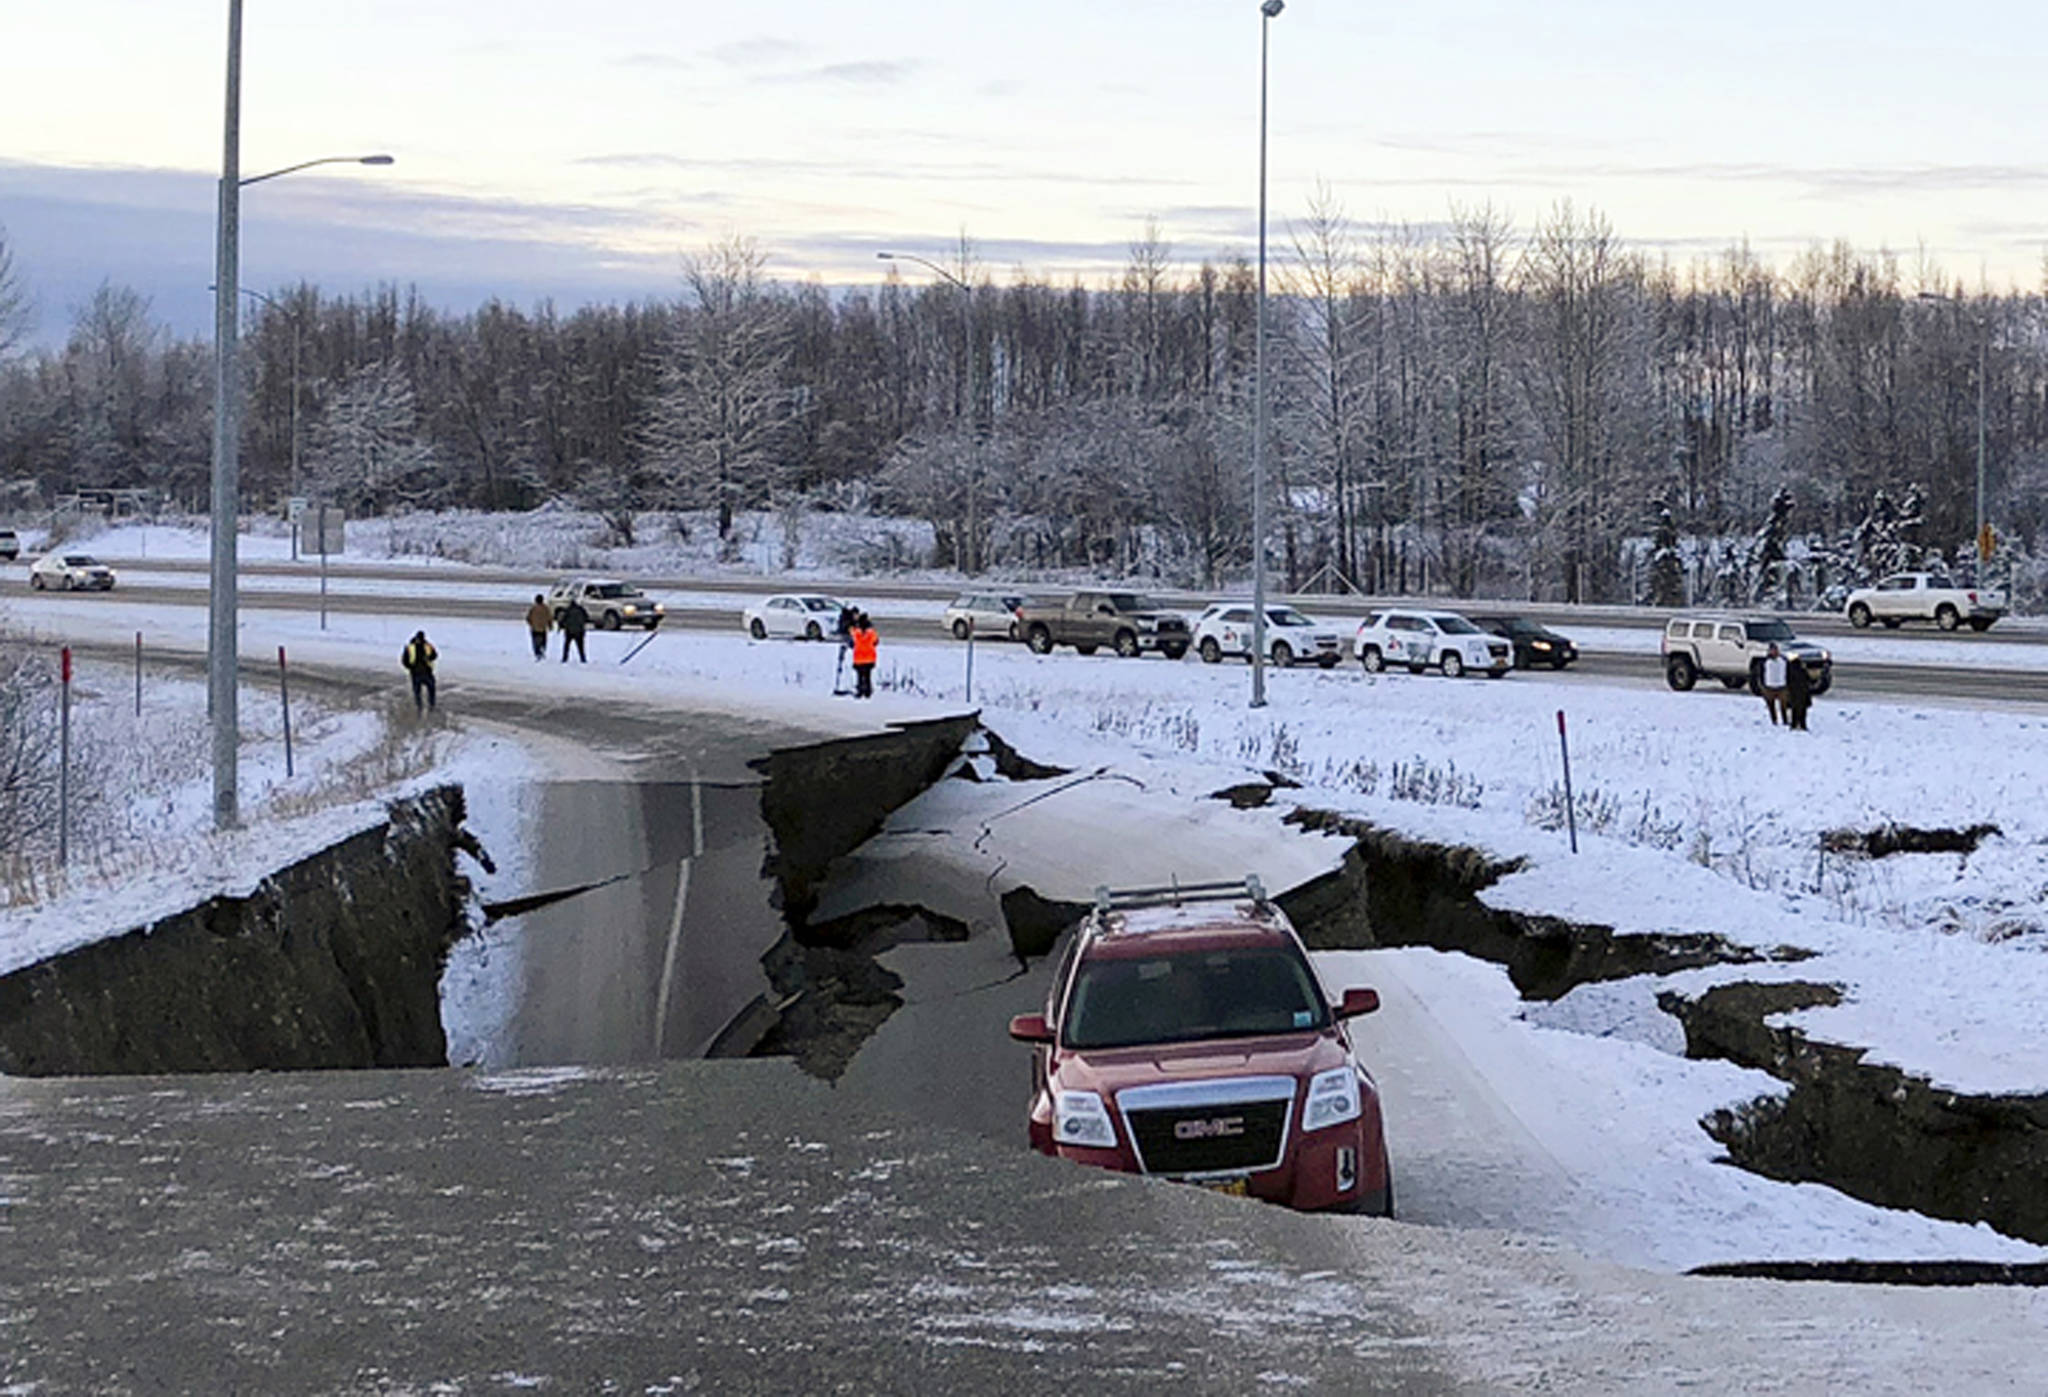 FILE - In this Friday, Nov. 30, 2018 file photo, Tom Sulcynski’s vehicle is trapped on a section of road that collapsed during an earthquake in Anchorage, Alaska. The collapsed roadway that became an iconic image of the destructive force of a magnitude 7.0 earthquake and its aftershocks was repaired just days after the quake. The off-ramp connecting Minnesota Drive and a road to Ted Stevens Anchorage International Airport reopened Tuesday, Dec. 4, 2018, with shoulder work finished Wednesday. (AP Photo/Dan Joling, File )